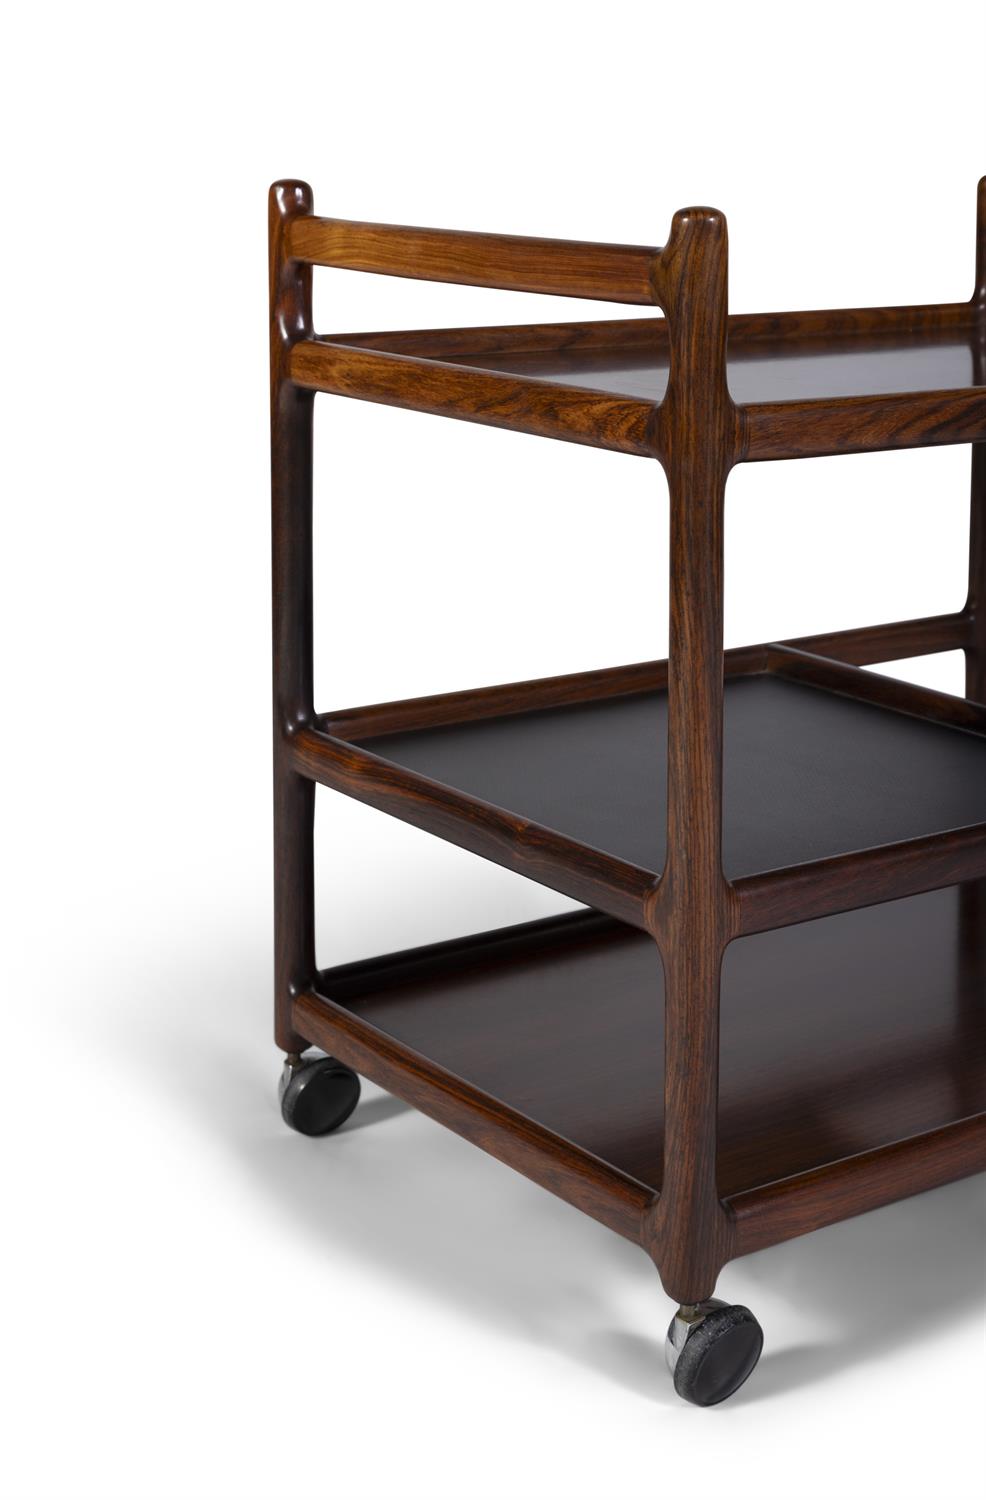 JOHANNES ANDERSEN A rosewood drinks trolley on four castors by Johannes Andersen for CFC - Image 4 of 5